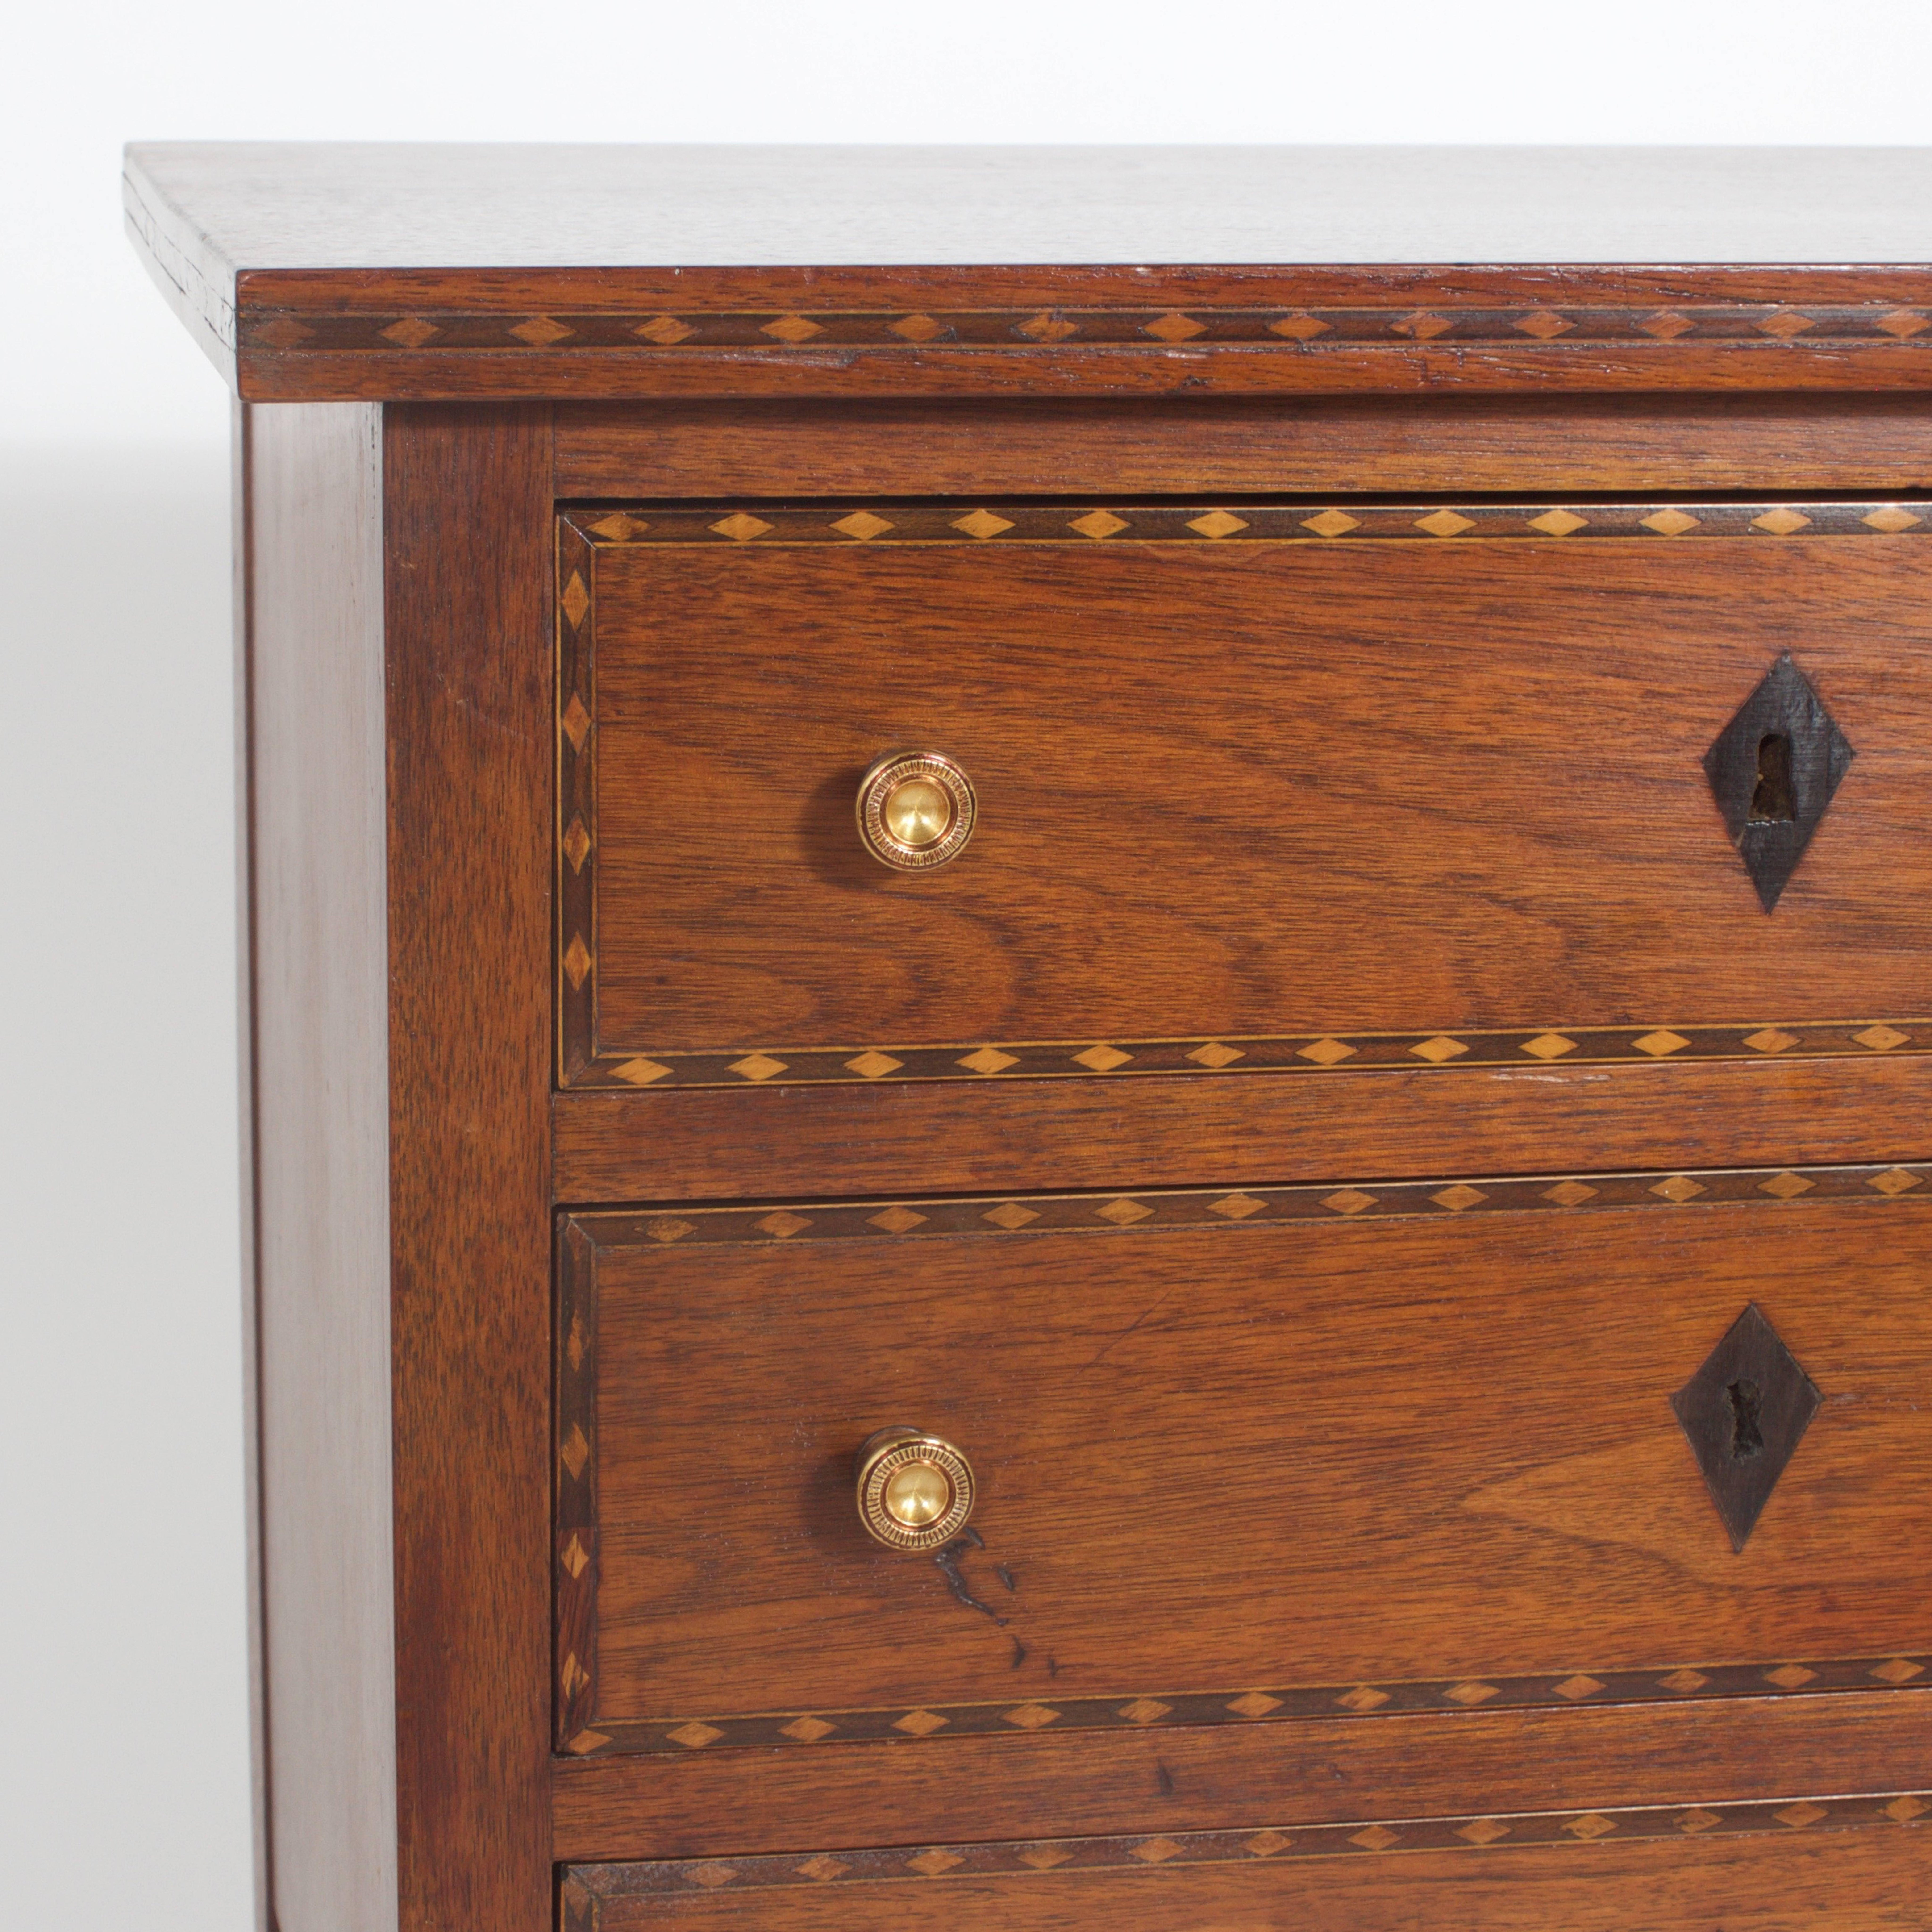 English Pair of Mahogany Edwardian Three-Drawer Tables or Nightstands